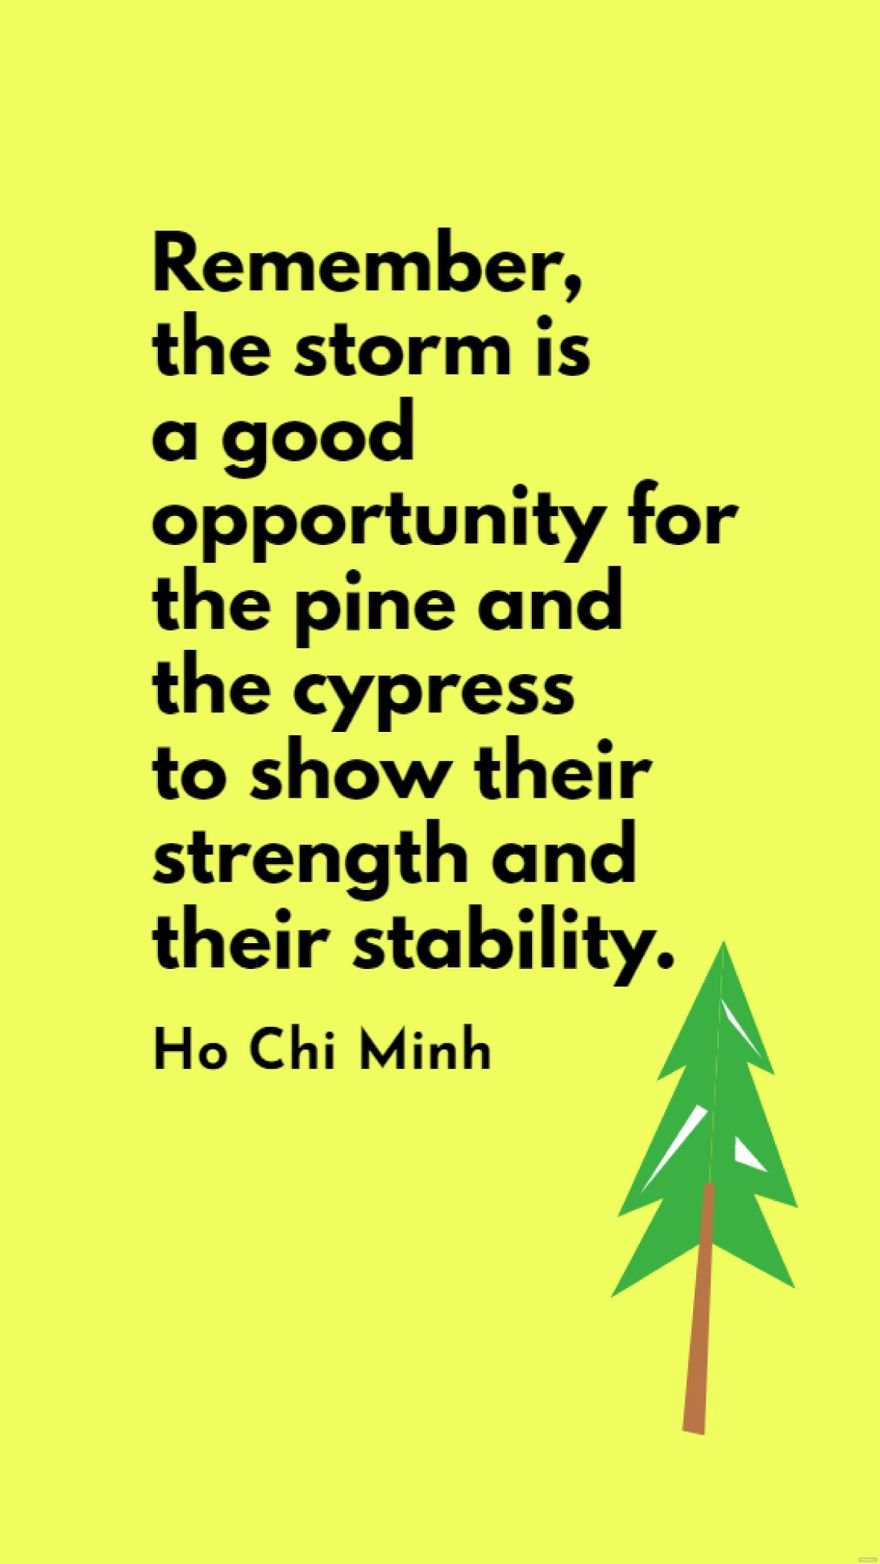 Ho Chi Minh - Remember, the storm is a good opportunity for the pine and the cypress to show their strength and their stability.